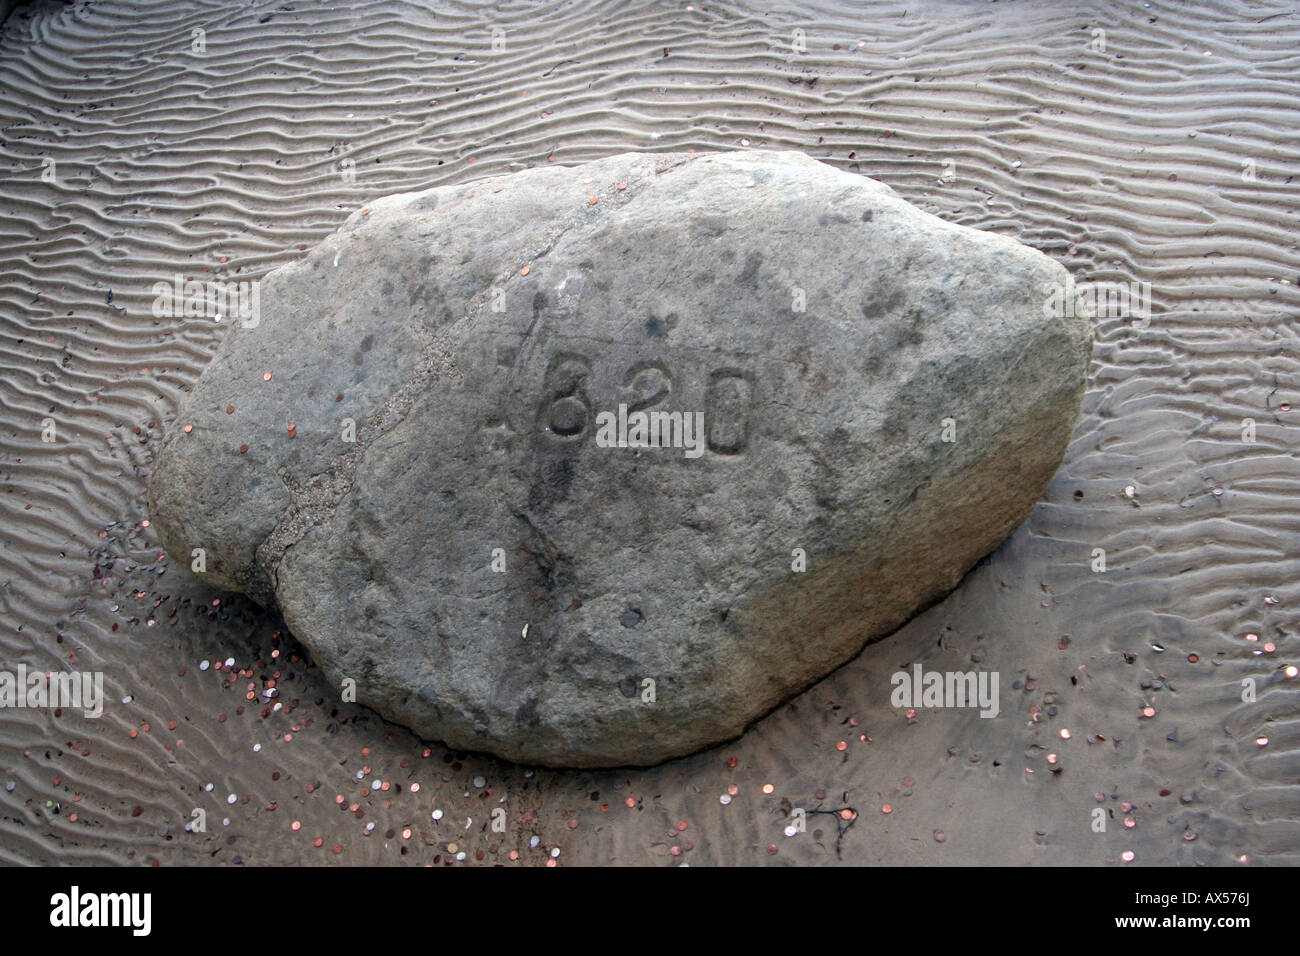 Plymouth Rock where the pilgrims landed in 1620 in Plymouth Massachusetts Stock Photo